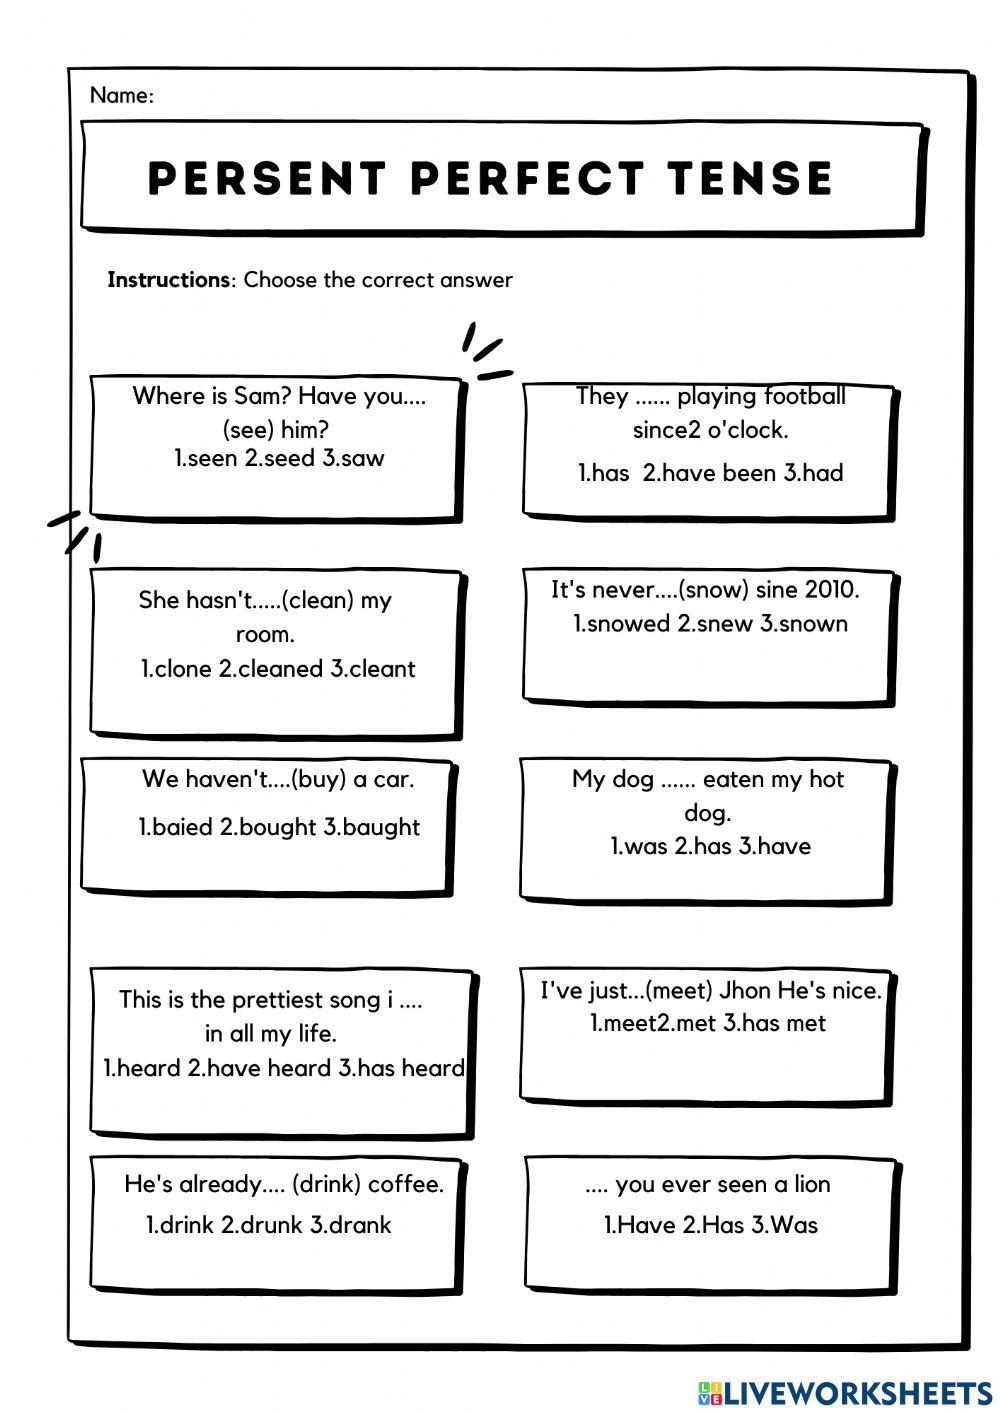 past-perfect-tense-worksheets-printable-learning-how-to-read